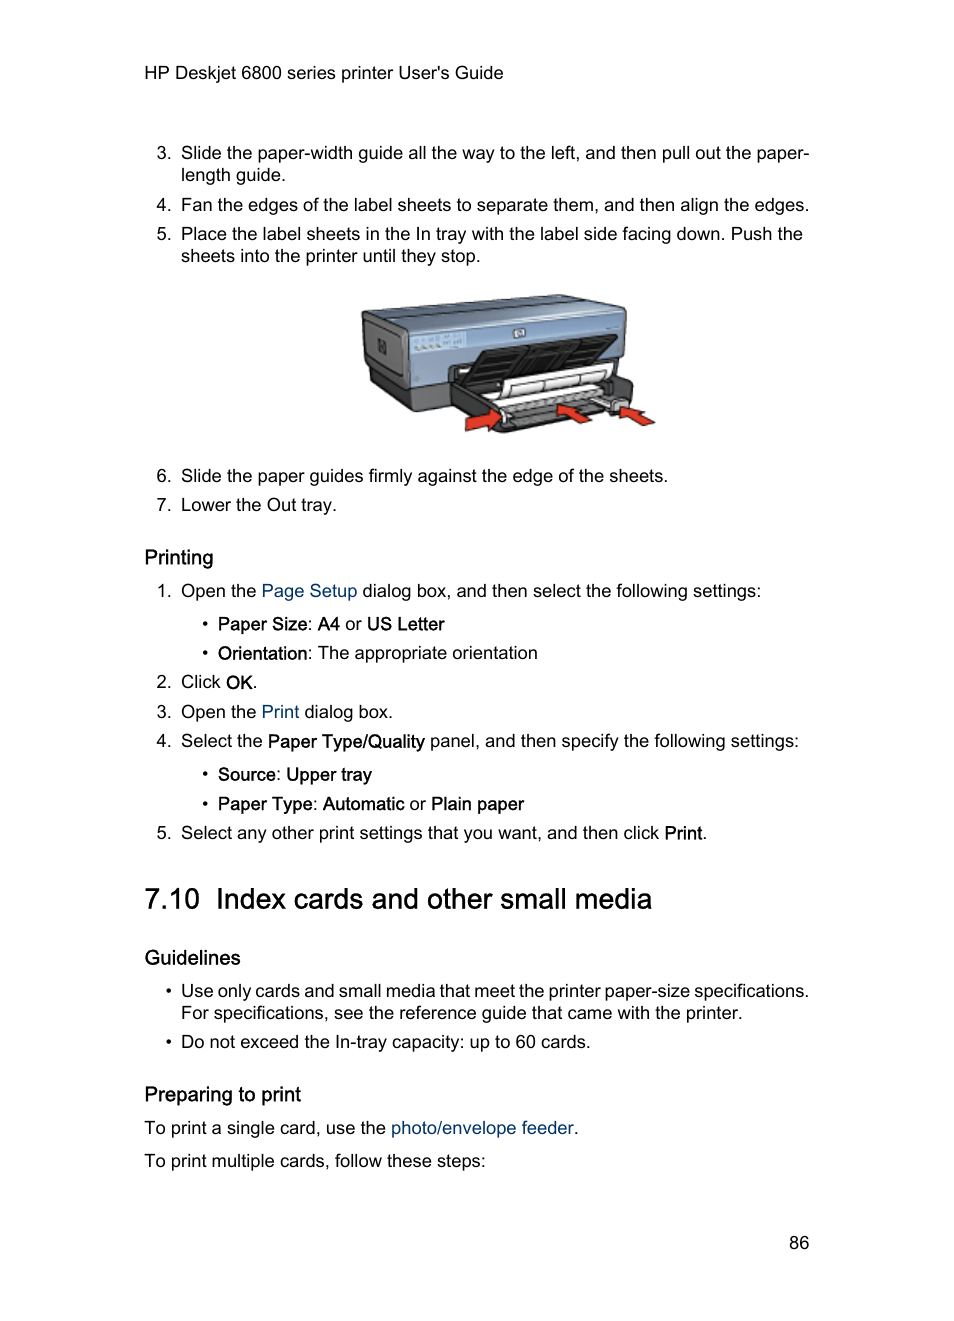 Printing, 10 index cards and other small media, Guidelines | HP Deskjet 6840  Color Inkjet Printer User Manual | Page 86 / 176